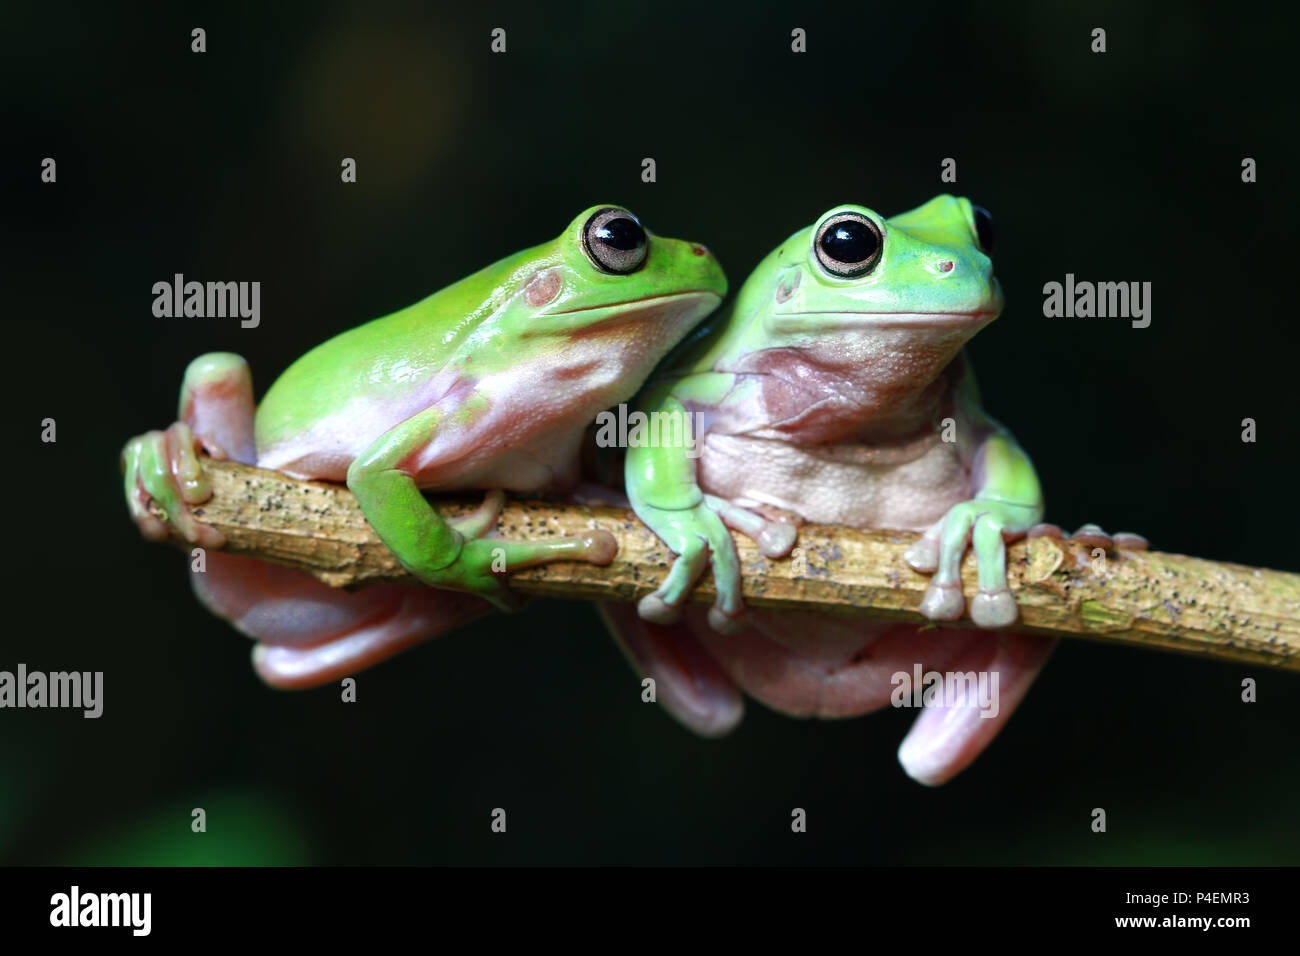 Two Dumpy tree frogs on a branch Stock Photo